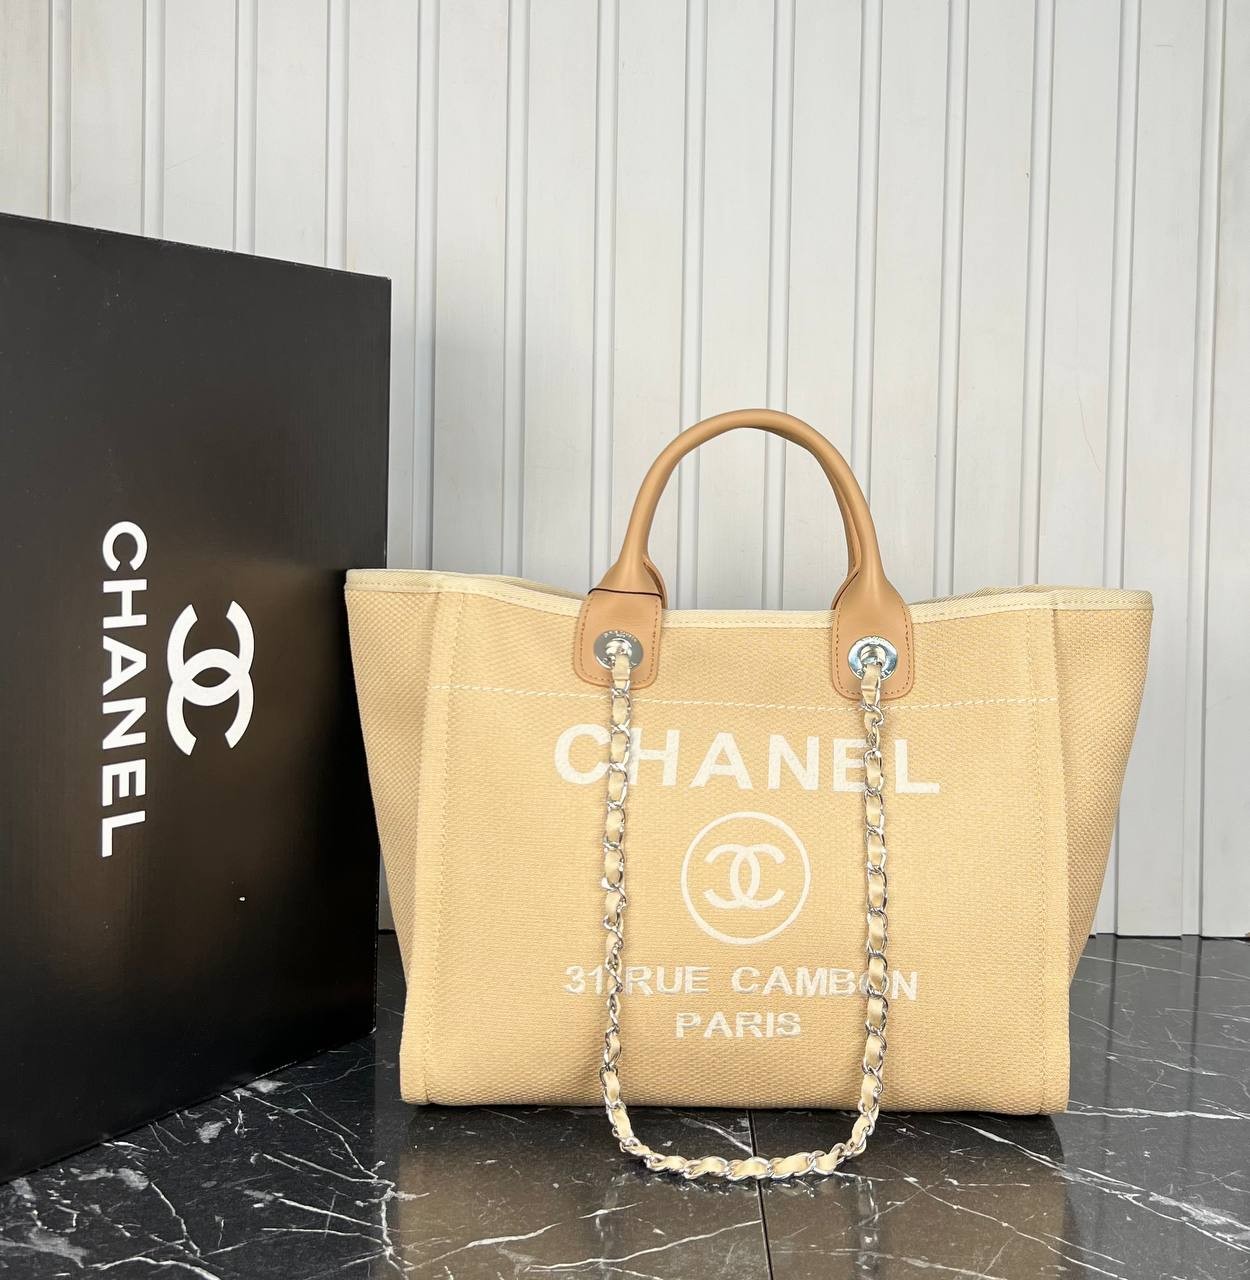 Elegant Chanel Shopping Tote Bag - Timeless Luxury for Every Occasion - Ivory